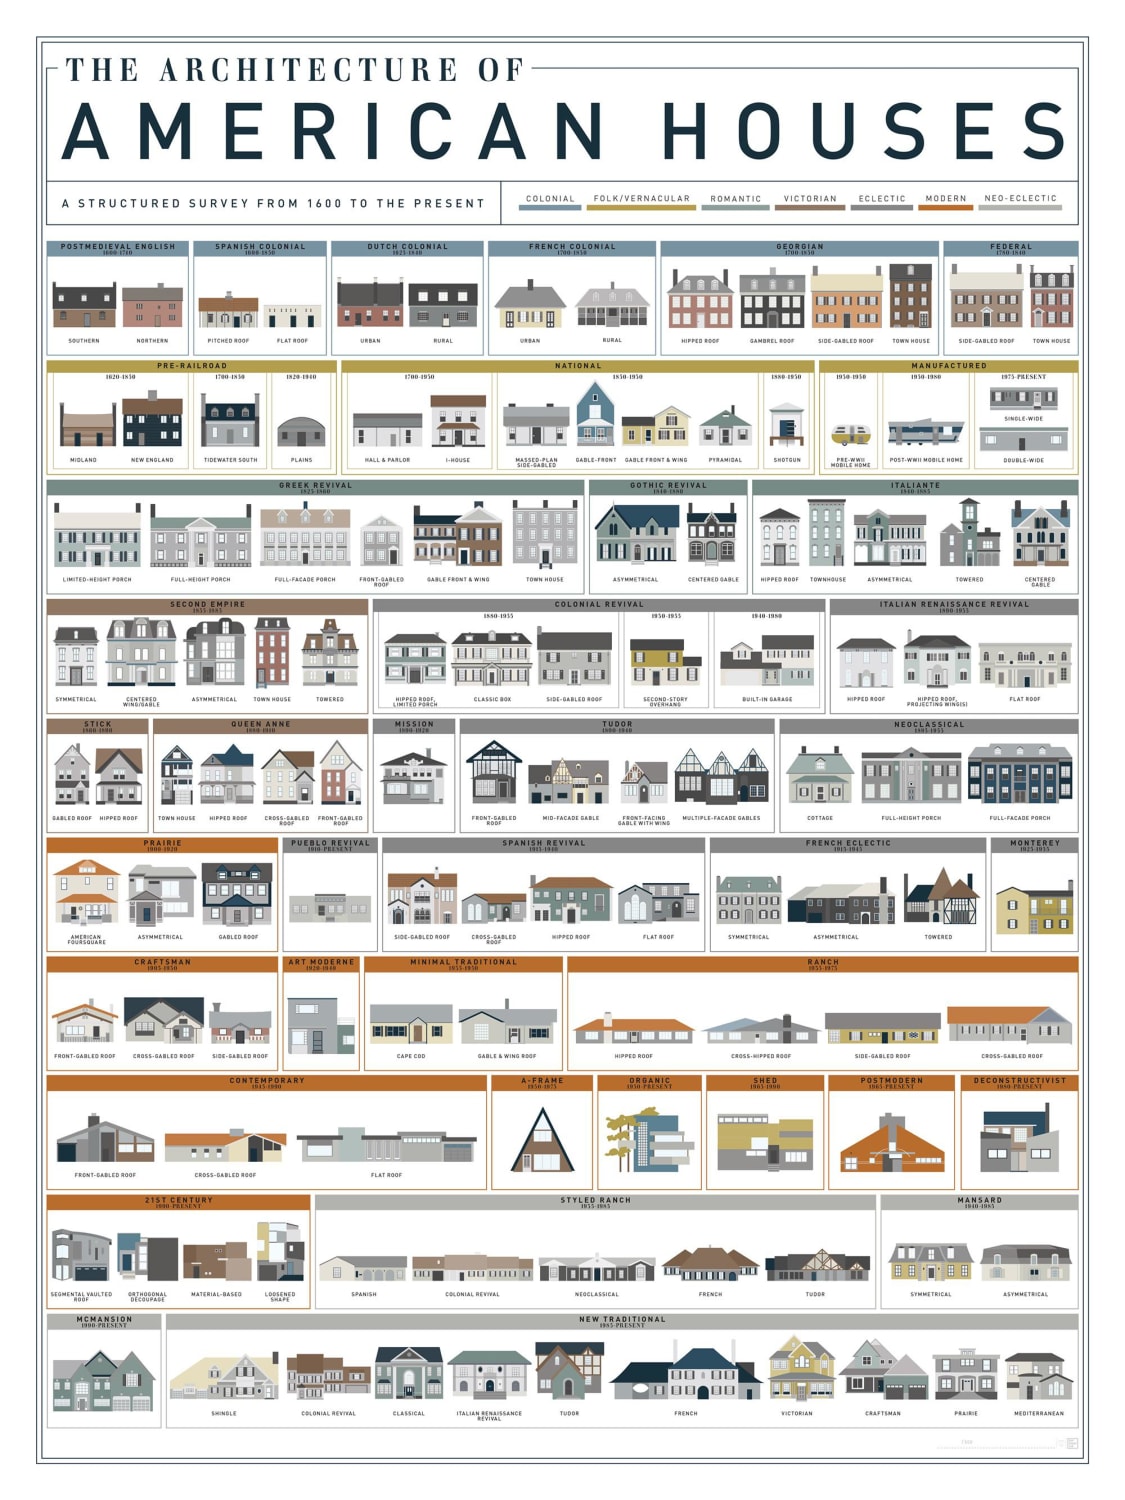 The Architectural Guide for American Home Styles